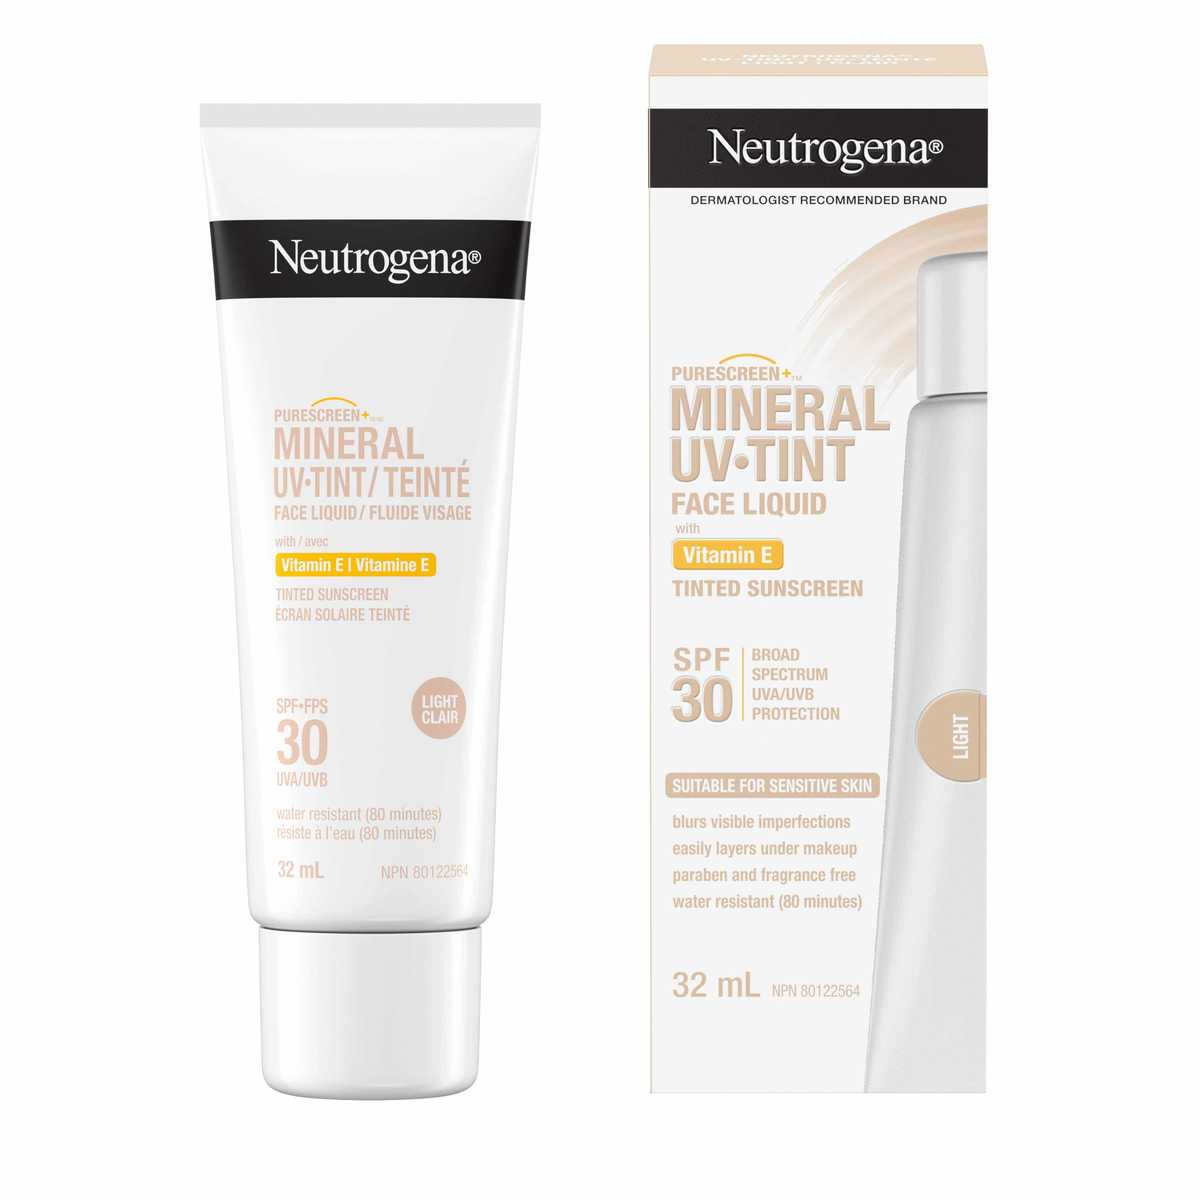 Front shot of NEUTROGENA® Purescreen+™ Mineral UV Tint Face Liquid Sunscreen SPF 30, Light, 32 mL squeeze tube and its packaging